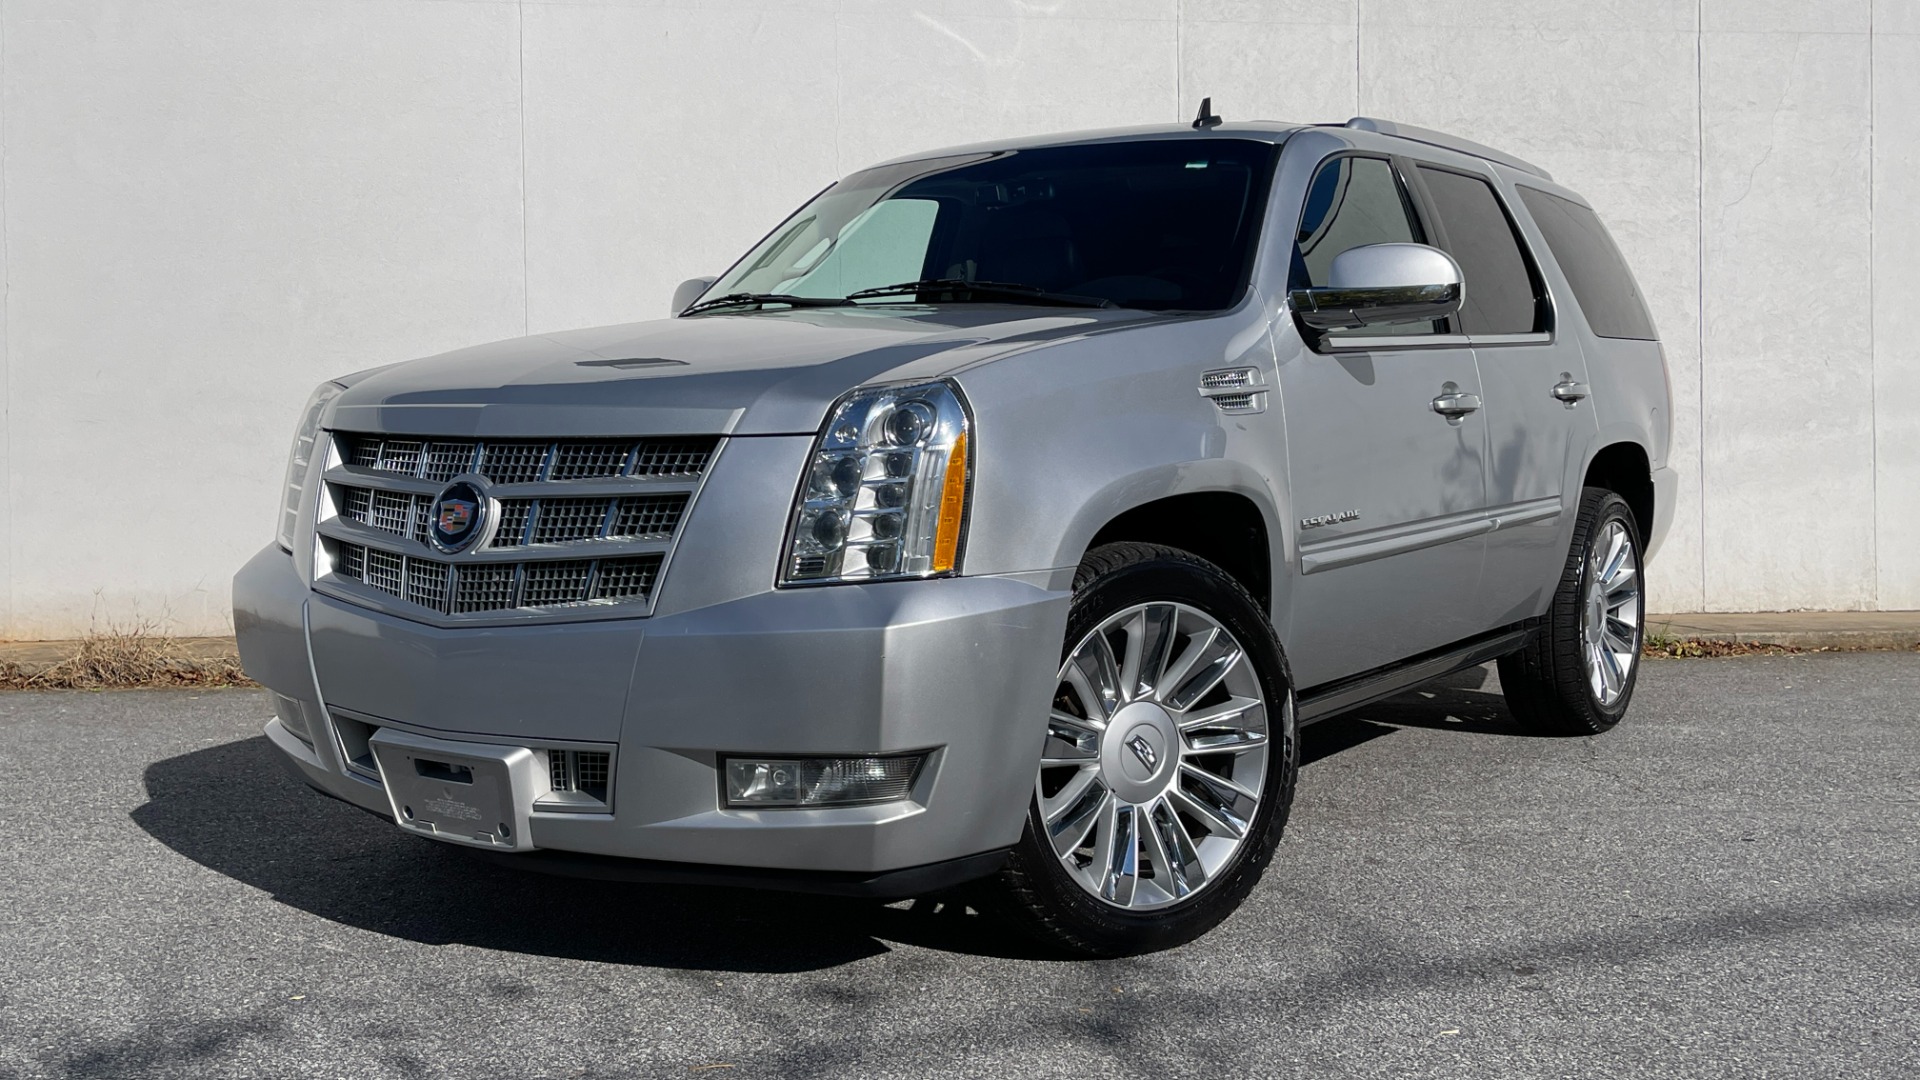 Used 2013 Cadillac Escalade PREMIUM / NAVIGATION / LEATHER / 3 ROW / AWD / LED LIGHTS for sale $25,599 at Formula Imports in Charlotte NC 28227 1